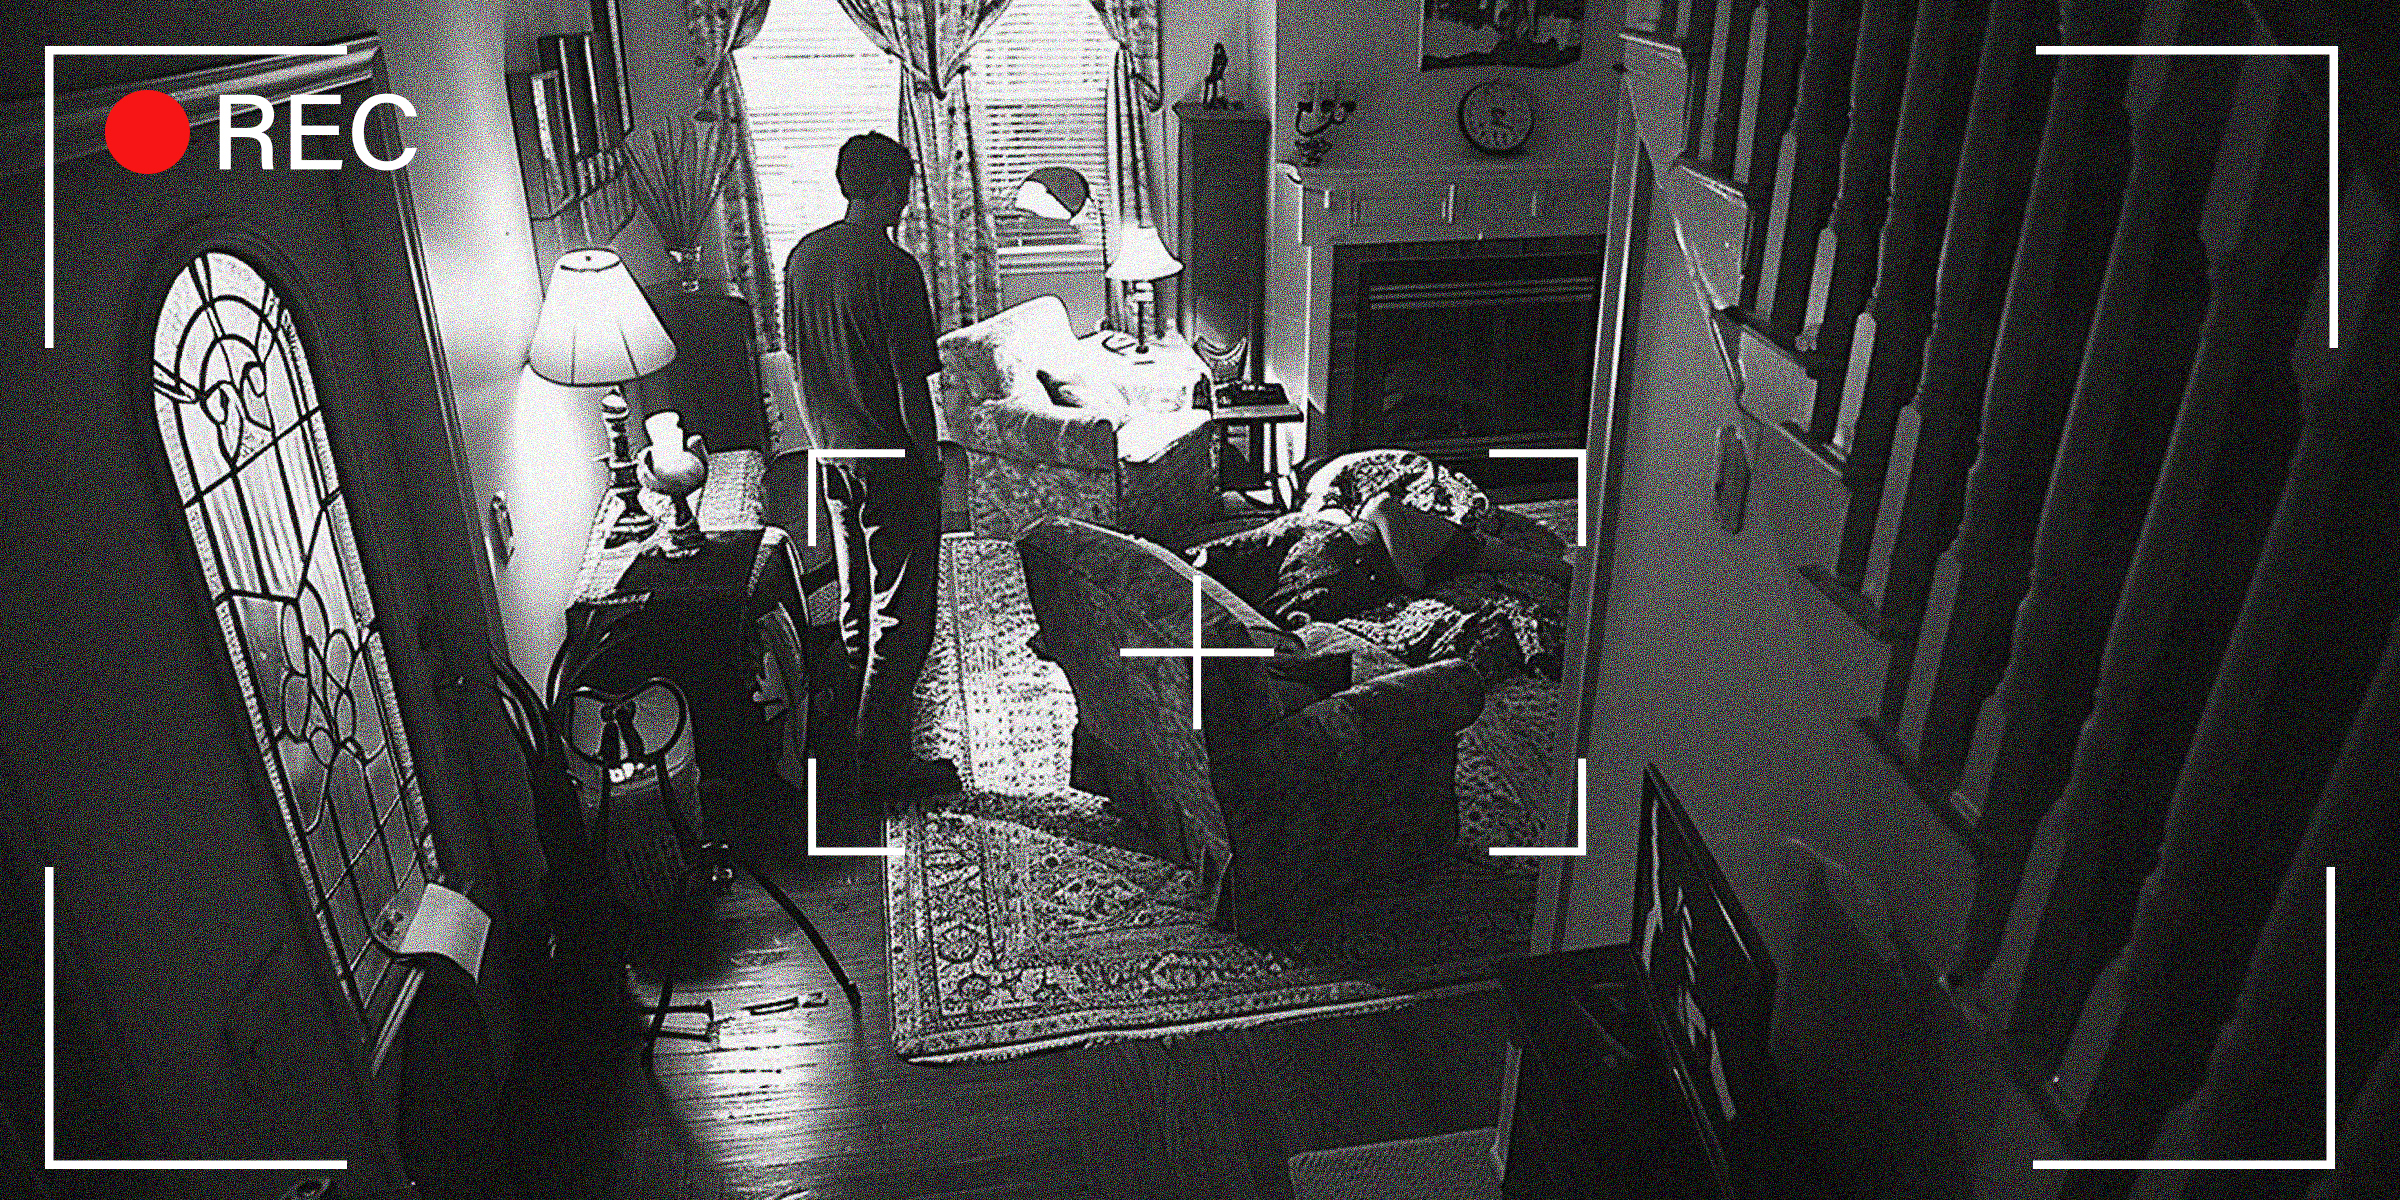 Camera footage showing a man standing in his house | Source: Midjourney